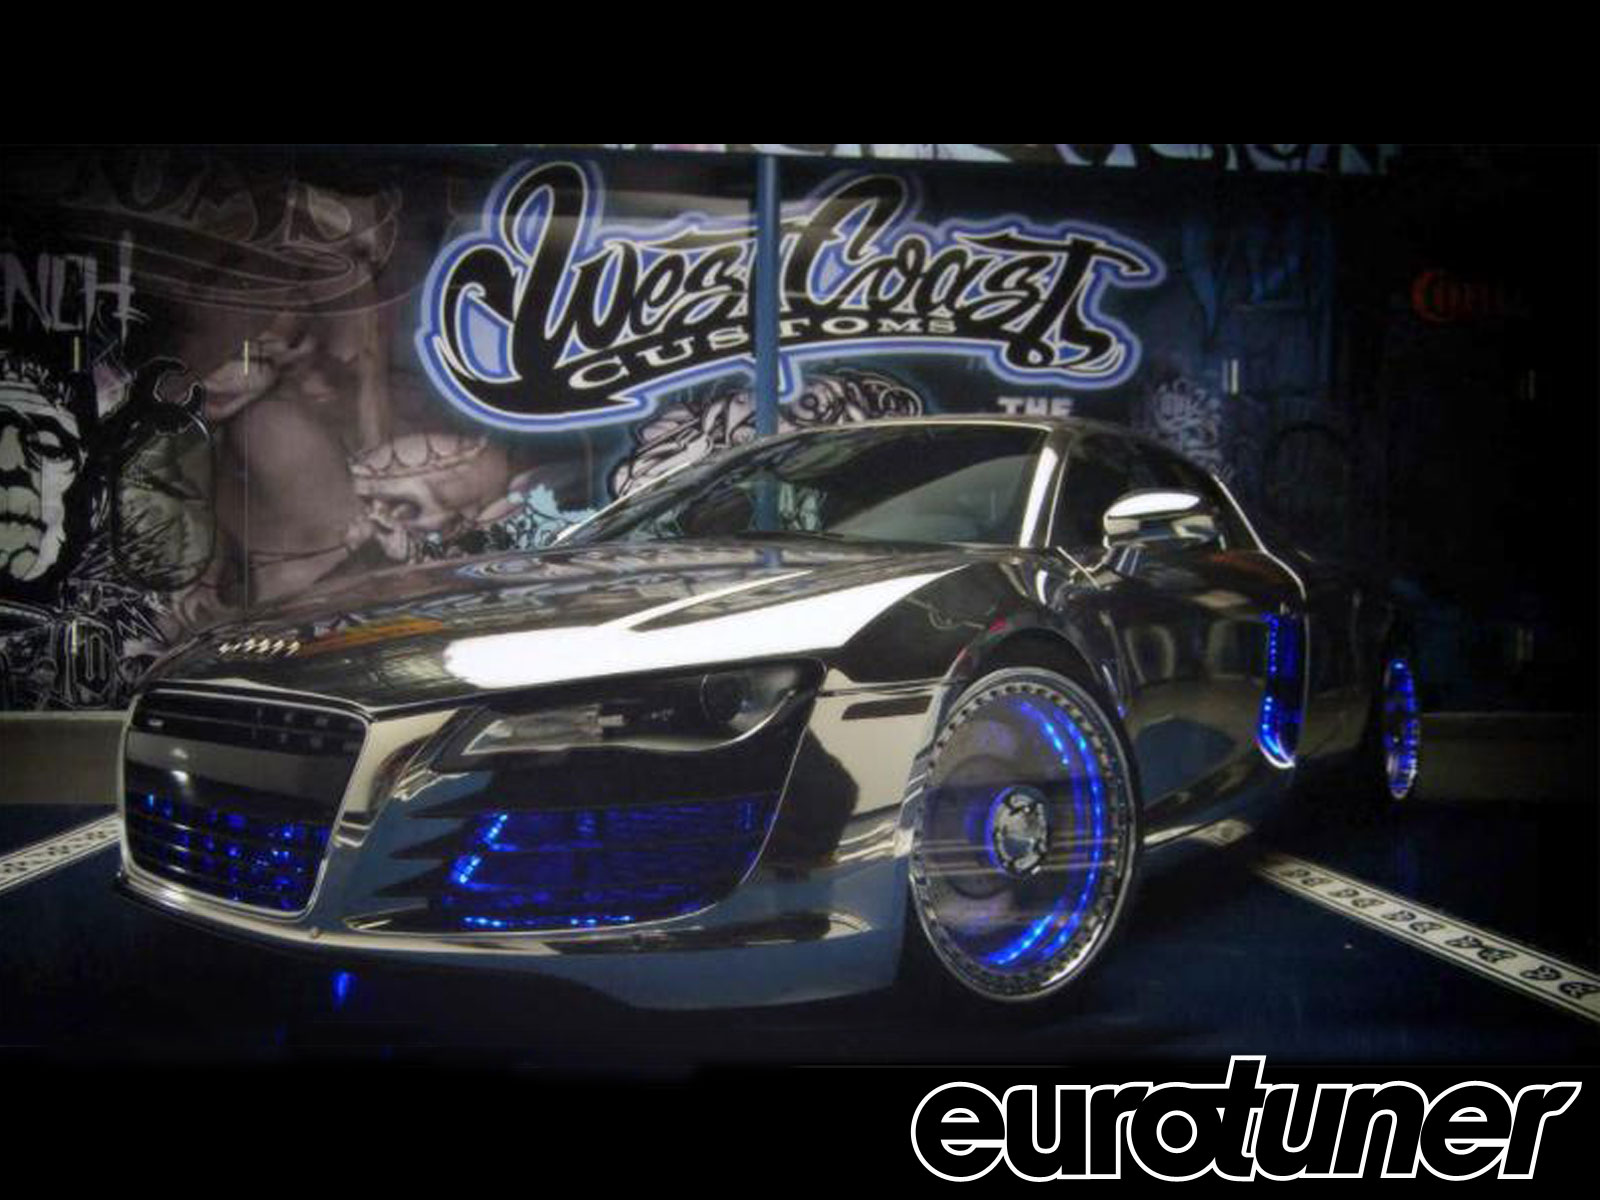 related pictures west coast customs wallpaper Car Pictures